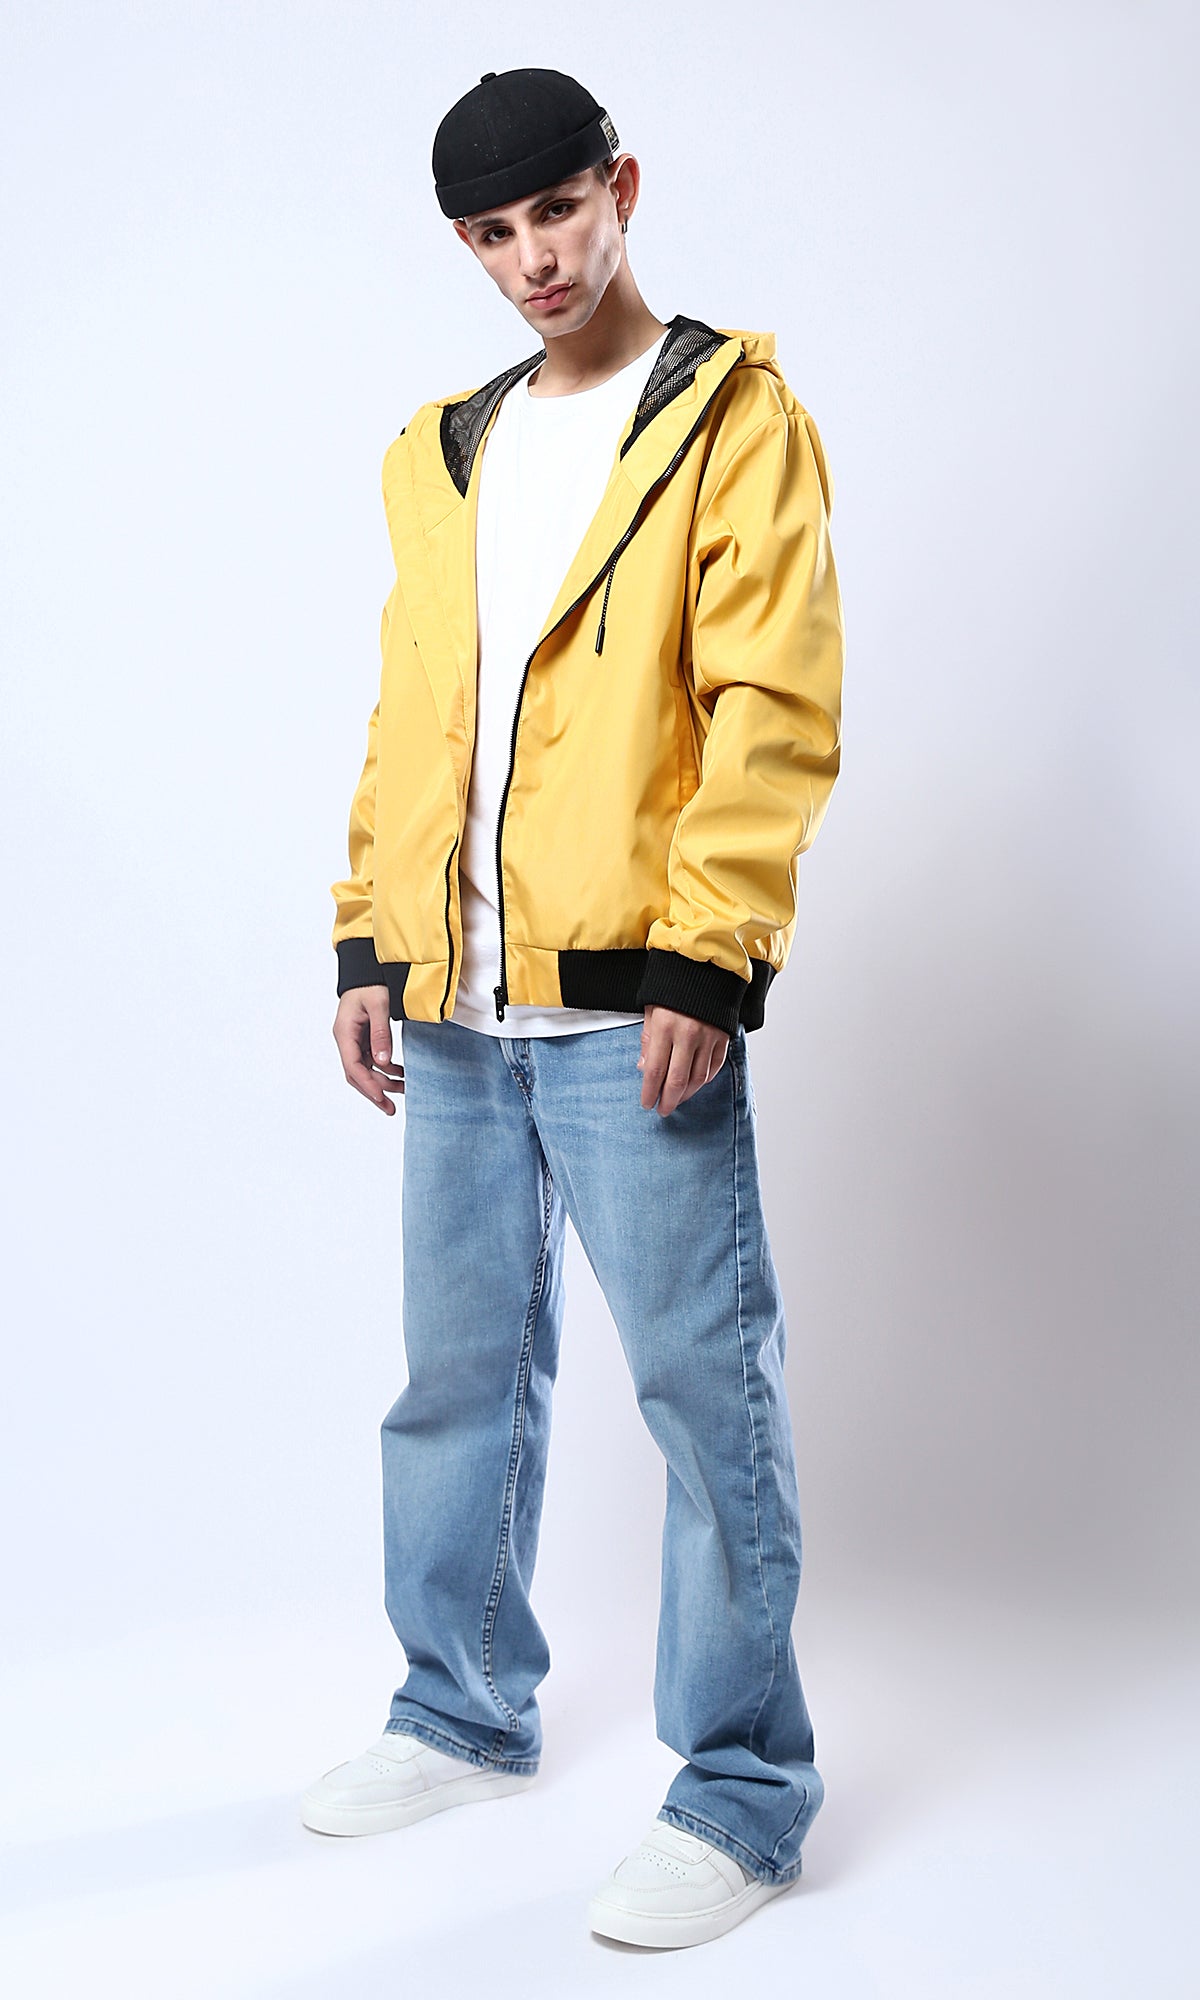 O175901 Hooded Neck With Drawstring Yellow Jacket